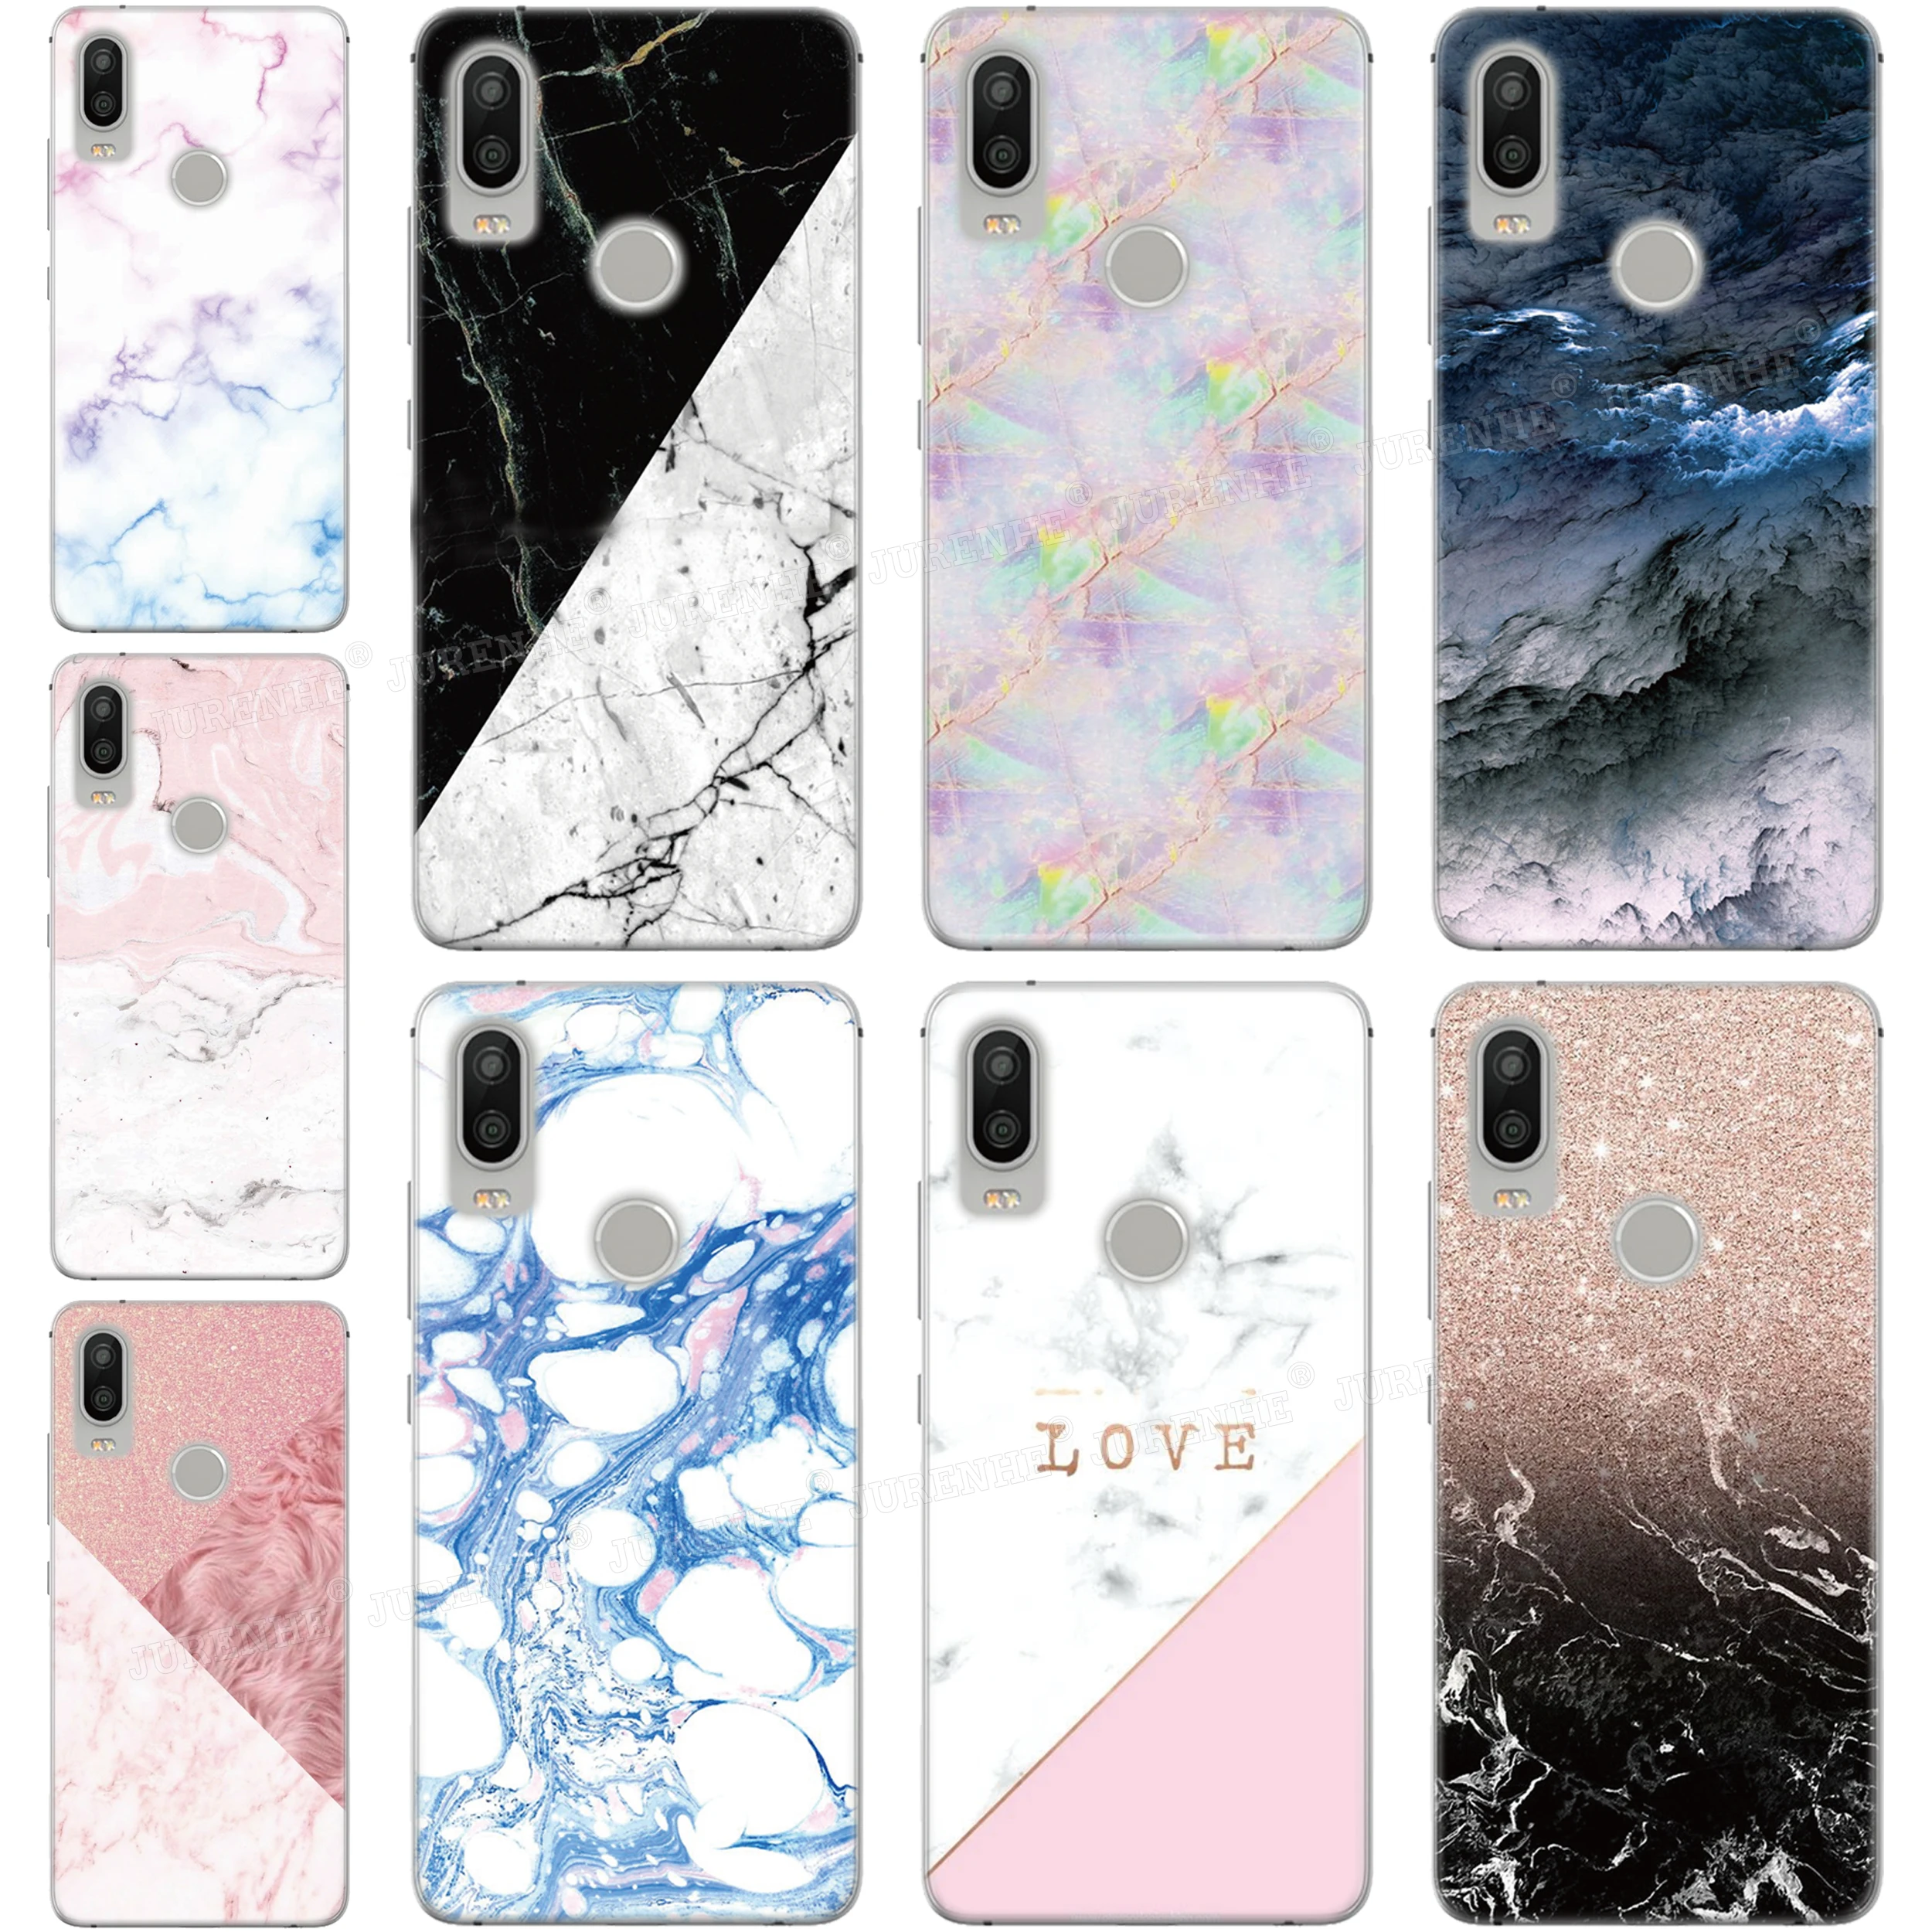 

Colorful Marble Phone Cover Case For BQ Aquaris X2 X Pro U U2 Lite V X5 E5 M5 E5s C VS Vsmart JOY Active 1 Plus 5035 5059 Fundas